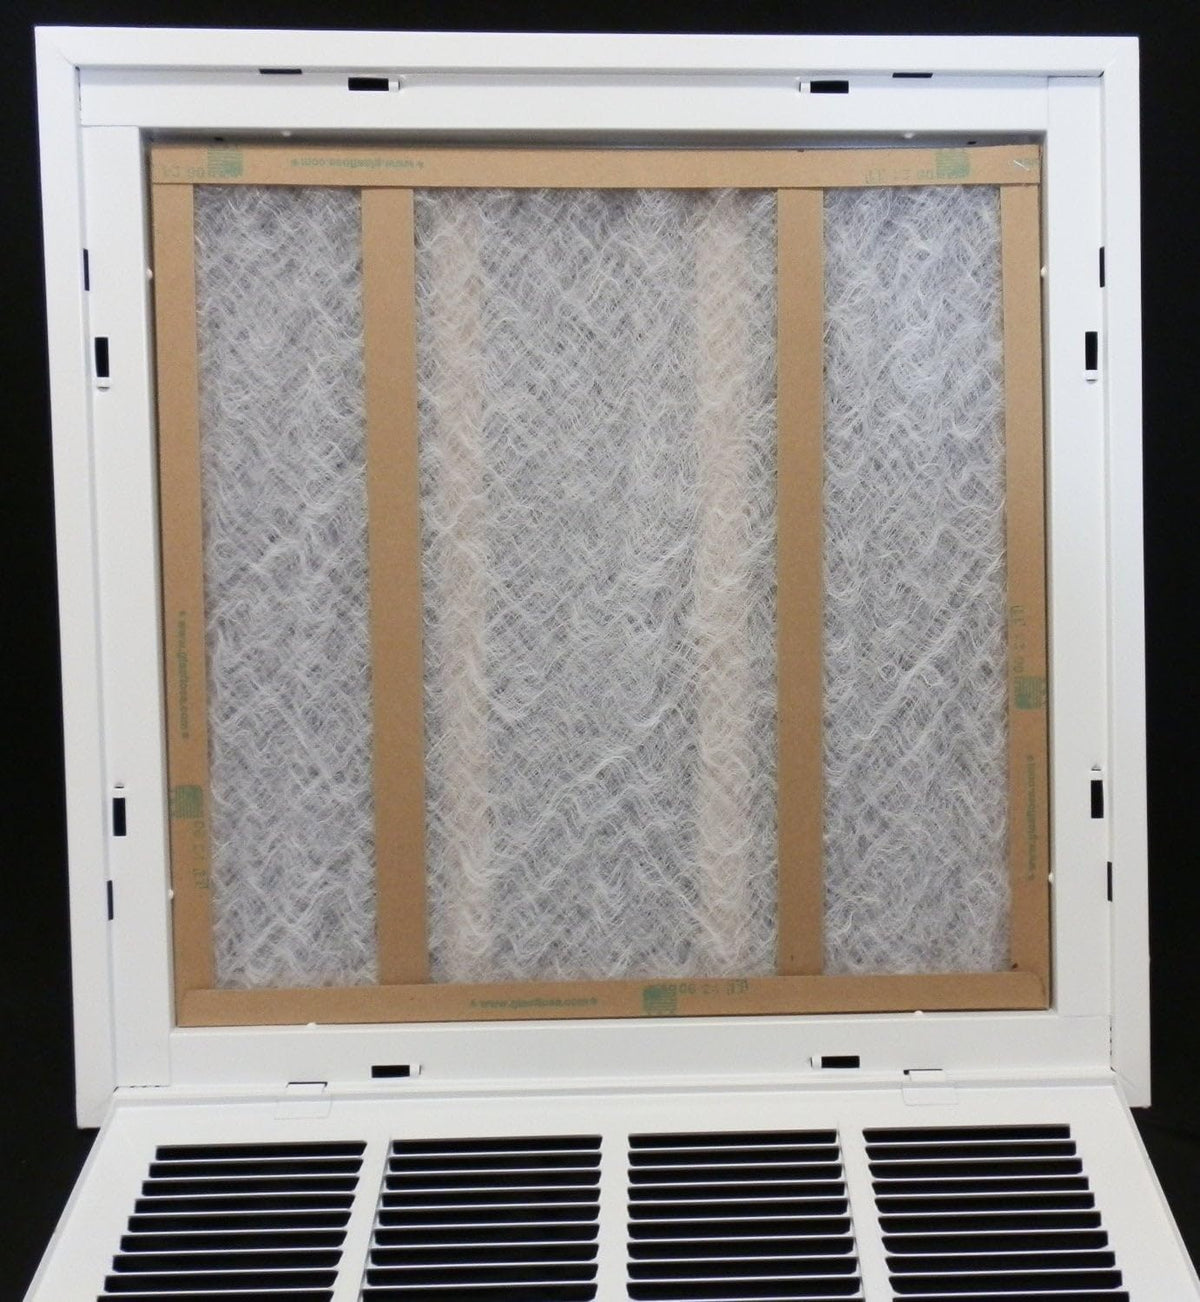 25&quot; X 28&quot; Steel Return Air Filter Grille for 1&quot; Filter - Removable Frame - [Outer Dimensions: 27 5/8&quot; X 30 5/8&quot;]